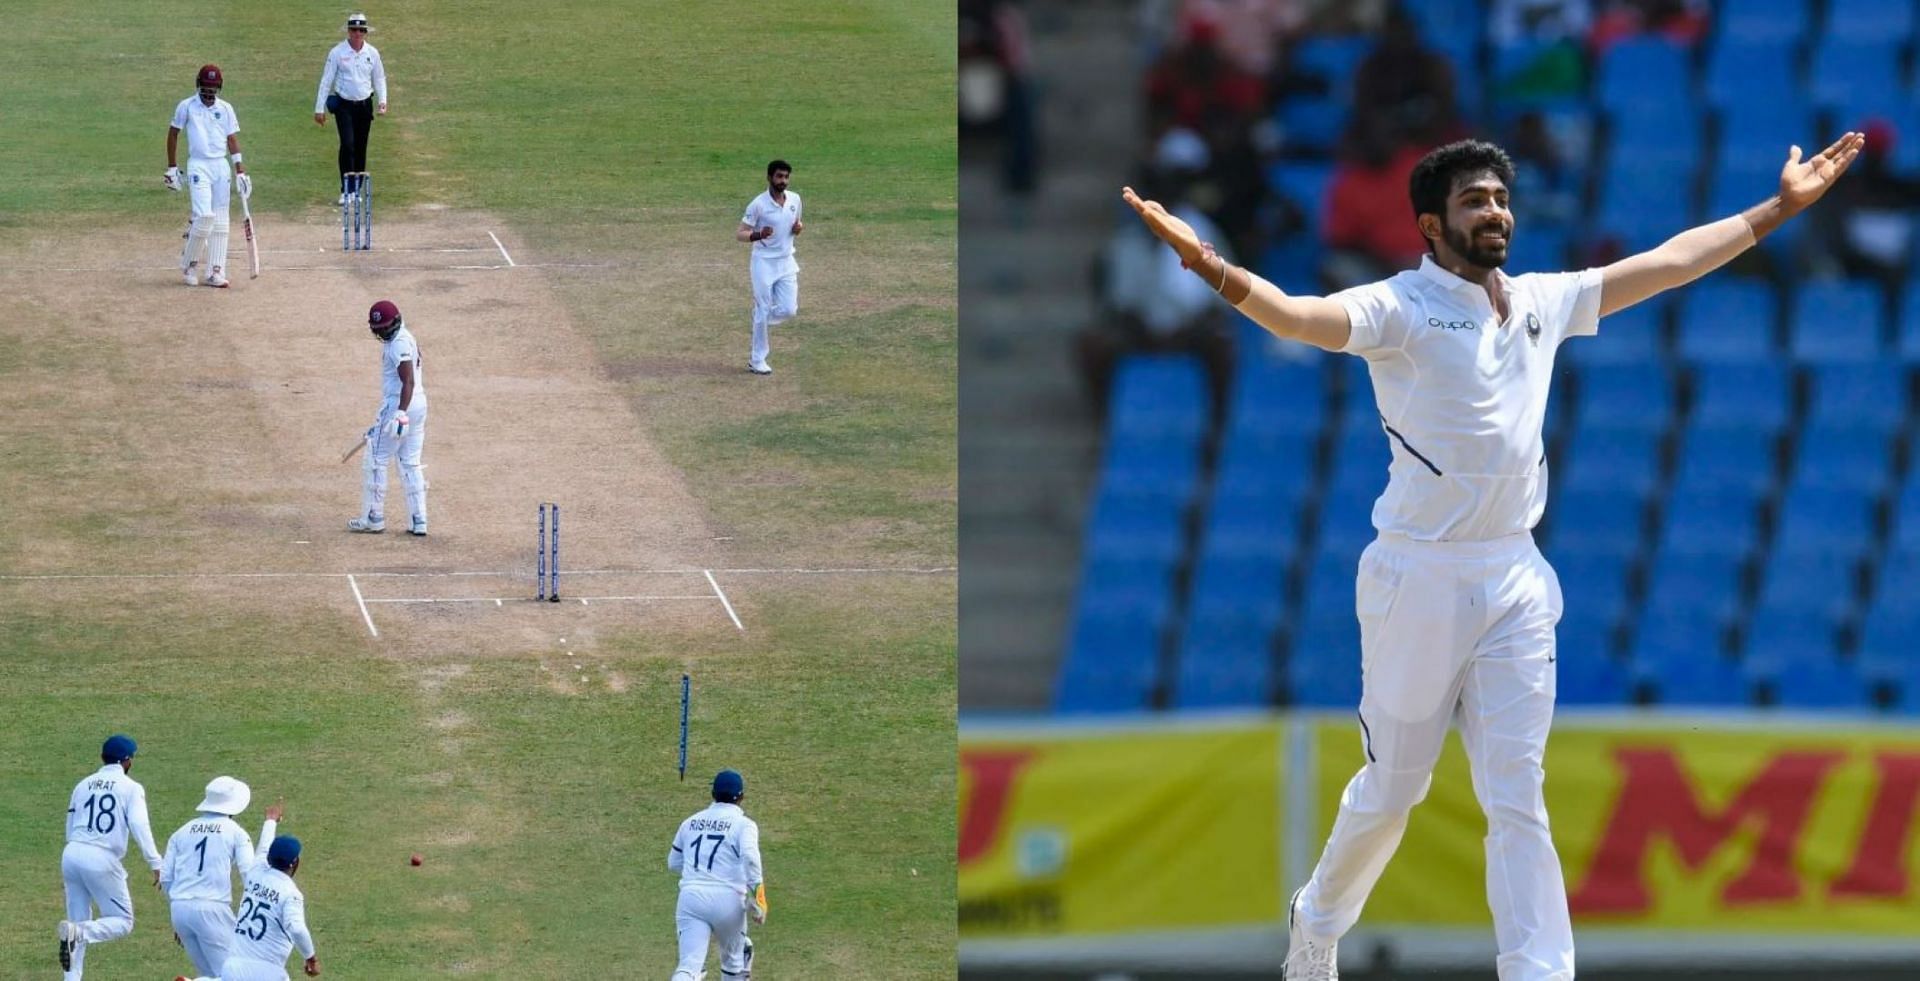 Bumrah had the stumps cartwheeling throughout his incredible spell